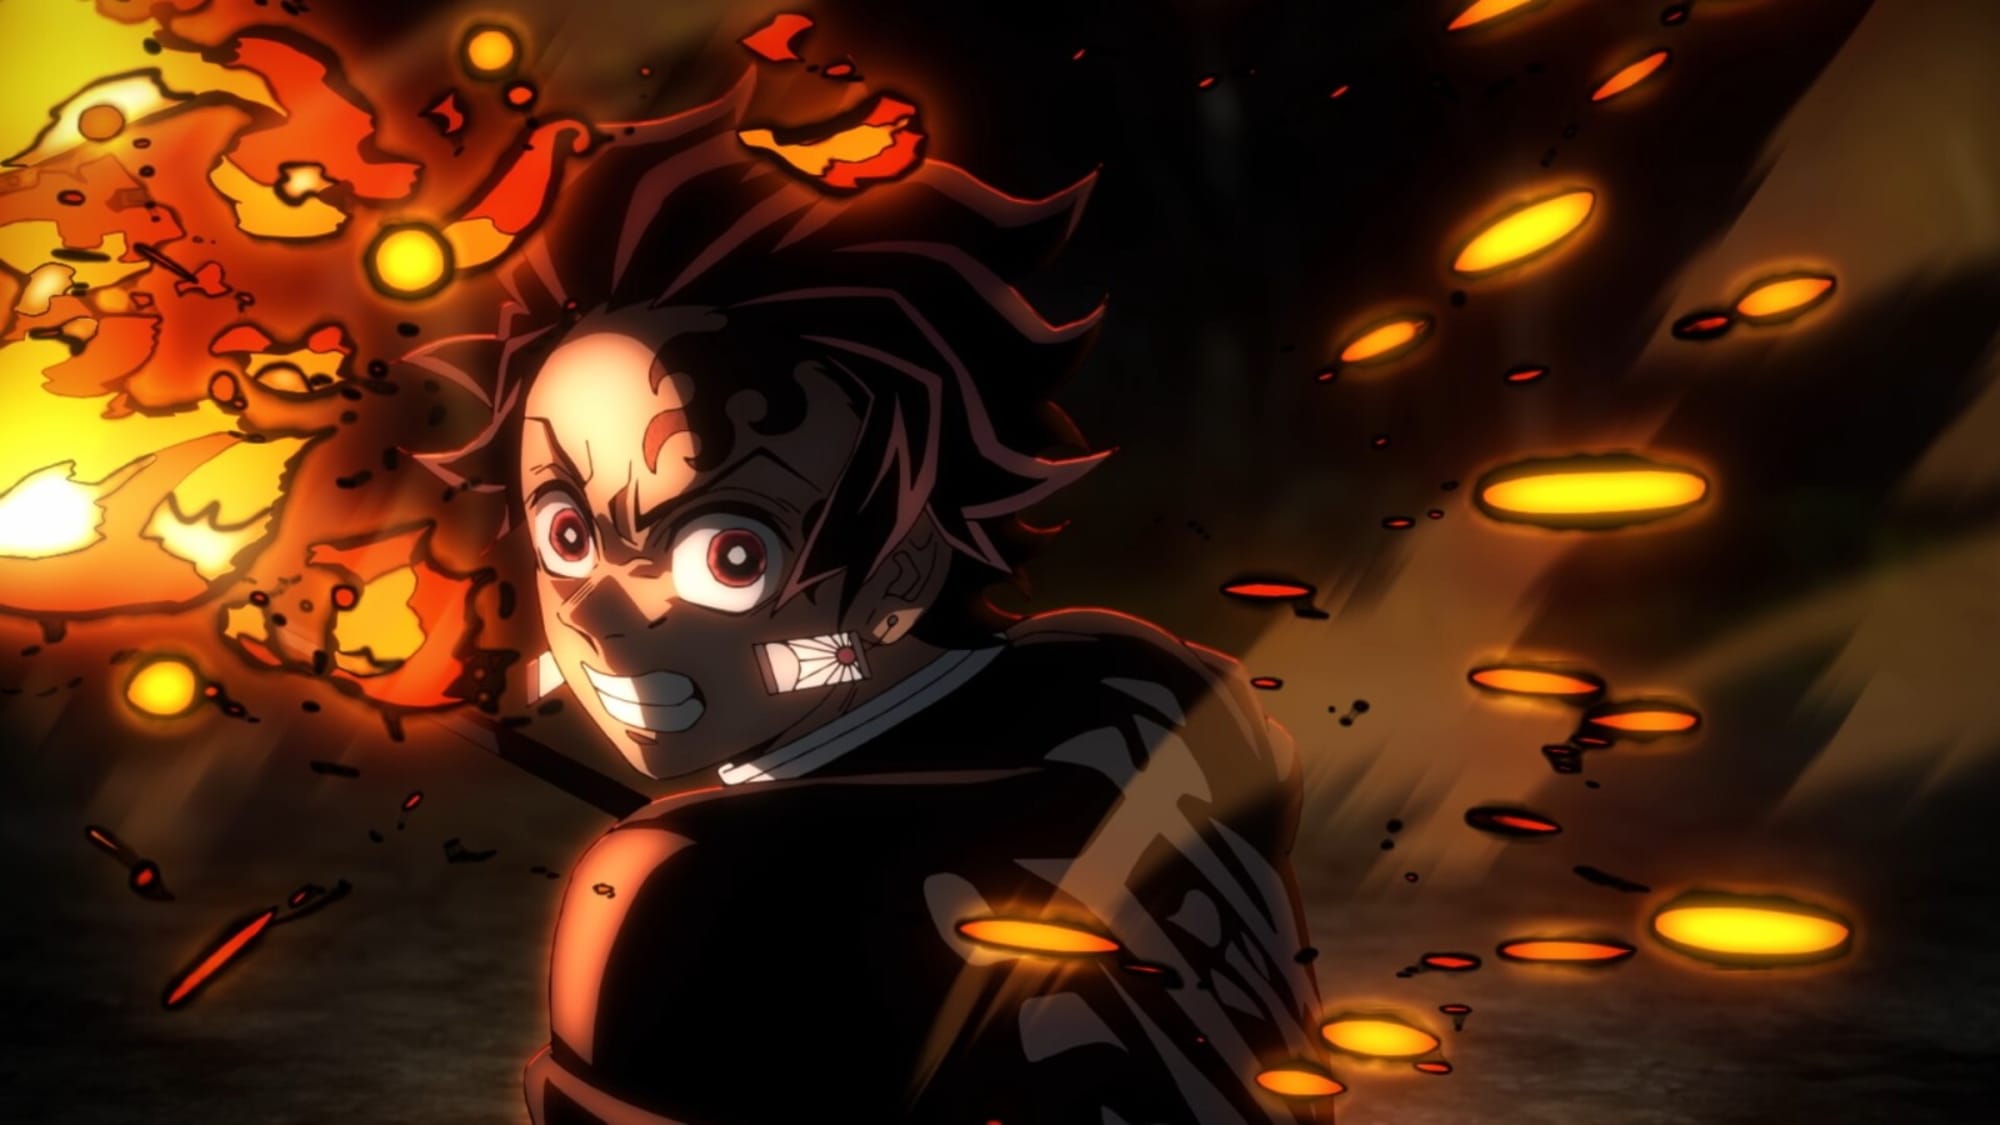 Demon Slayer Season 3 Episode 1 Release Date and Time (International)